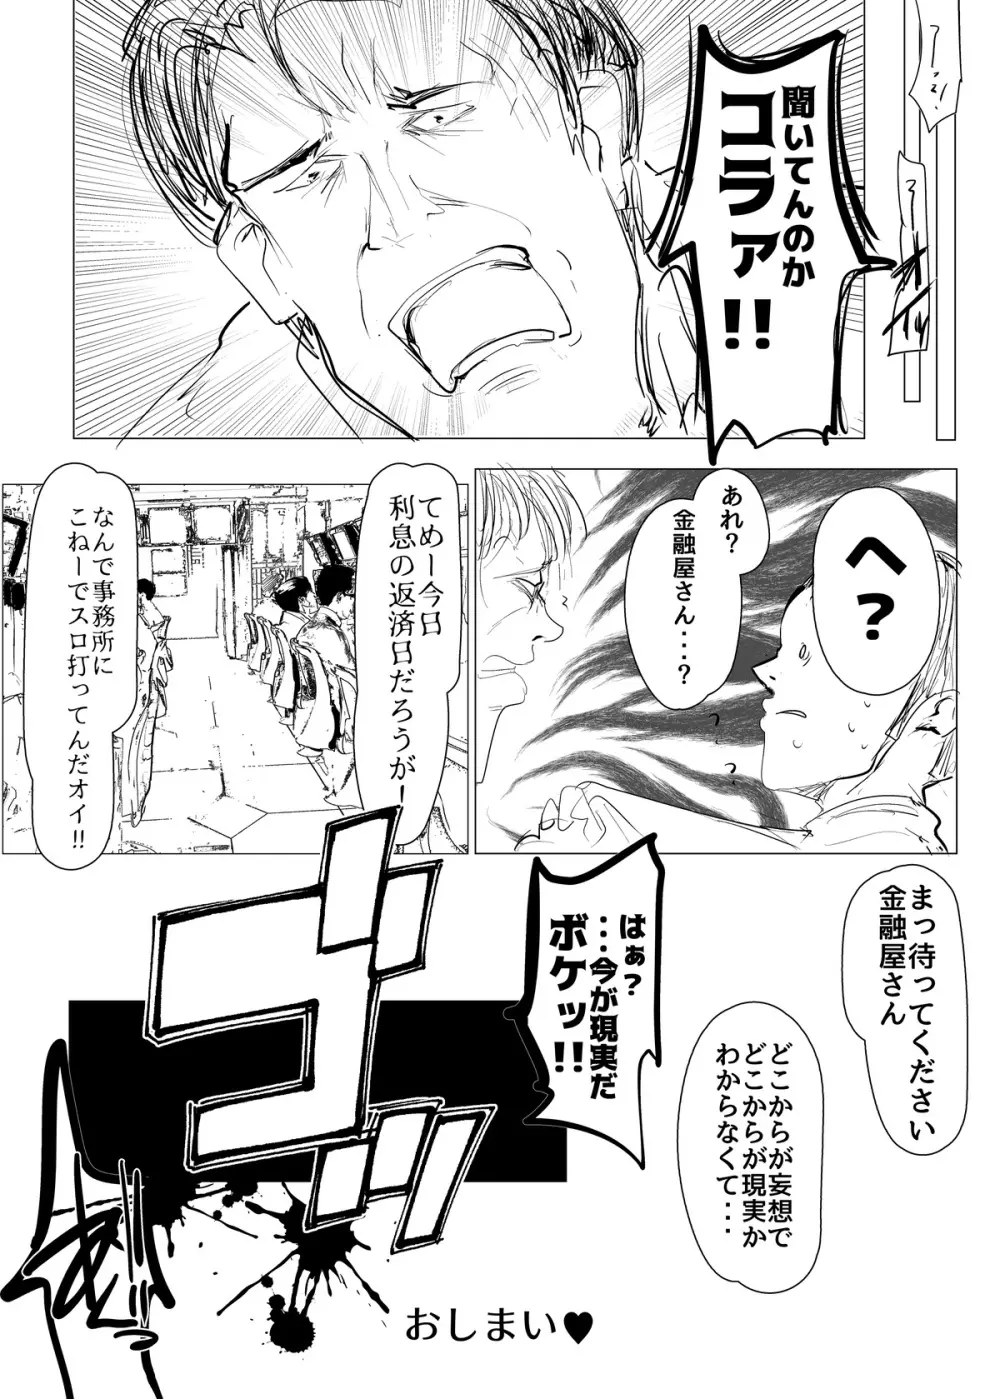 Re:ゼロから始めるパチスロ生活 Page.15